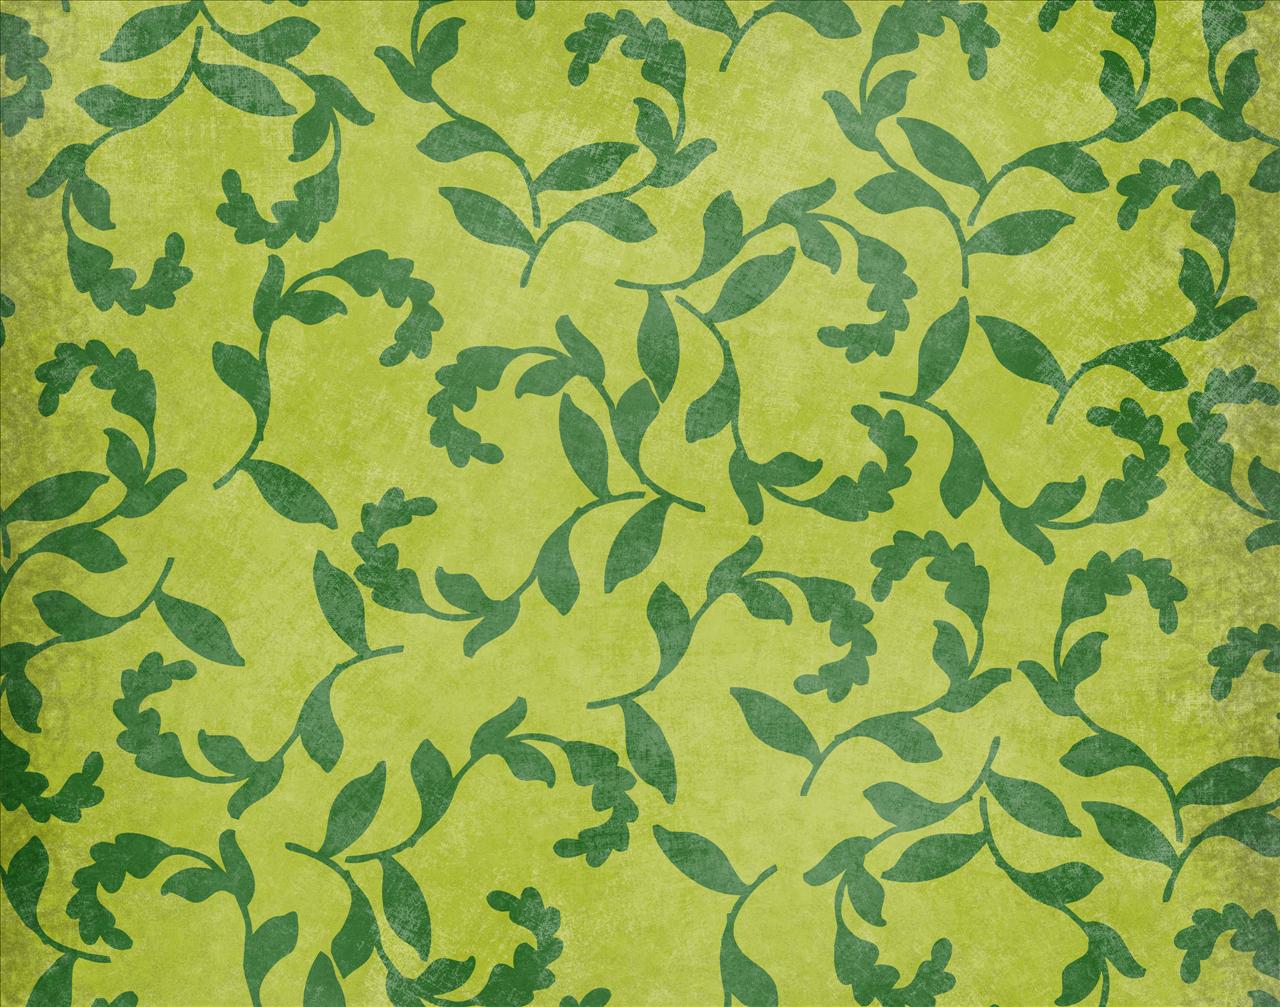 Green Vines Backgrounds